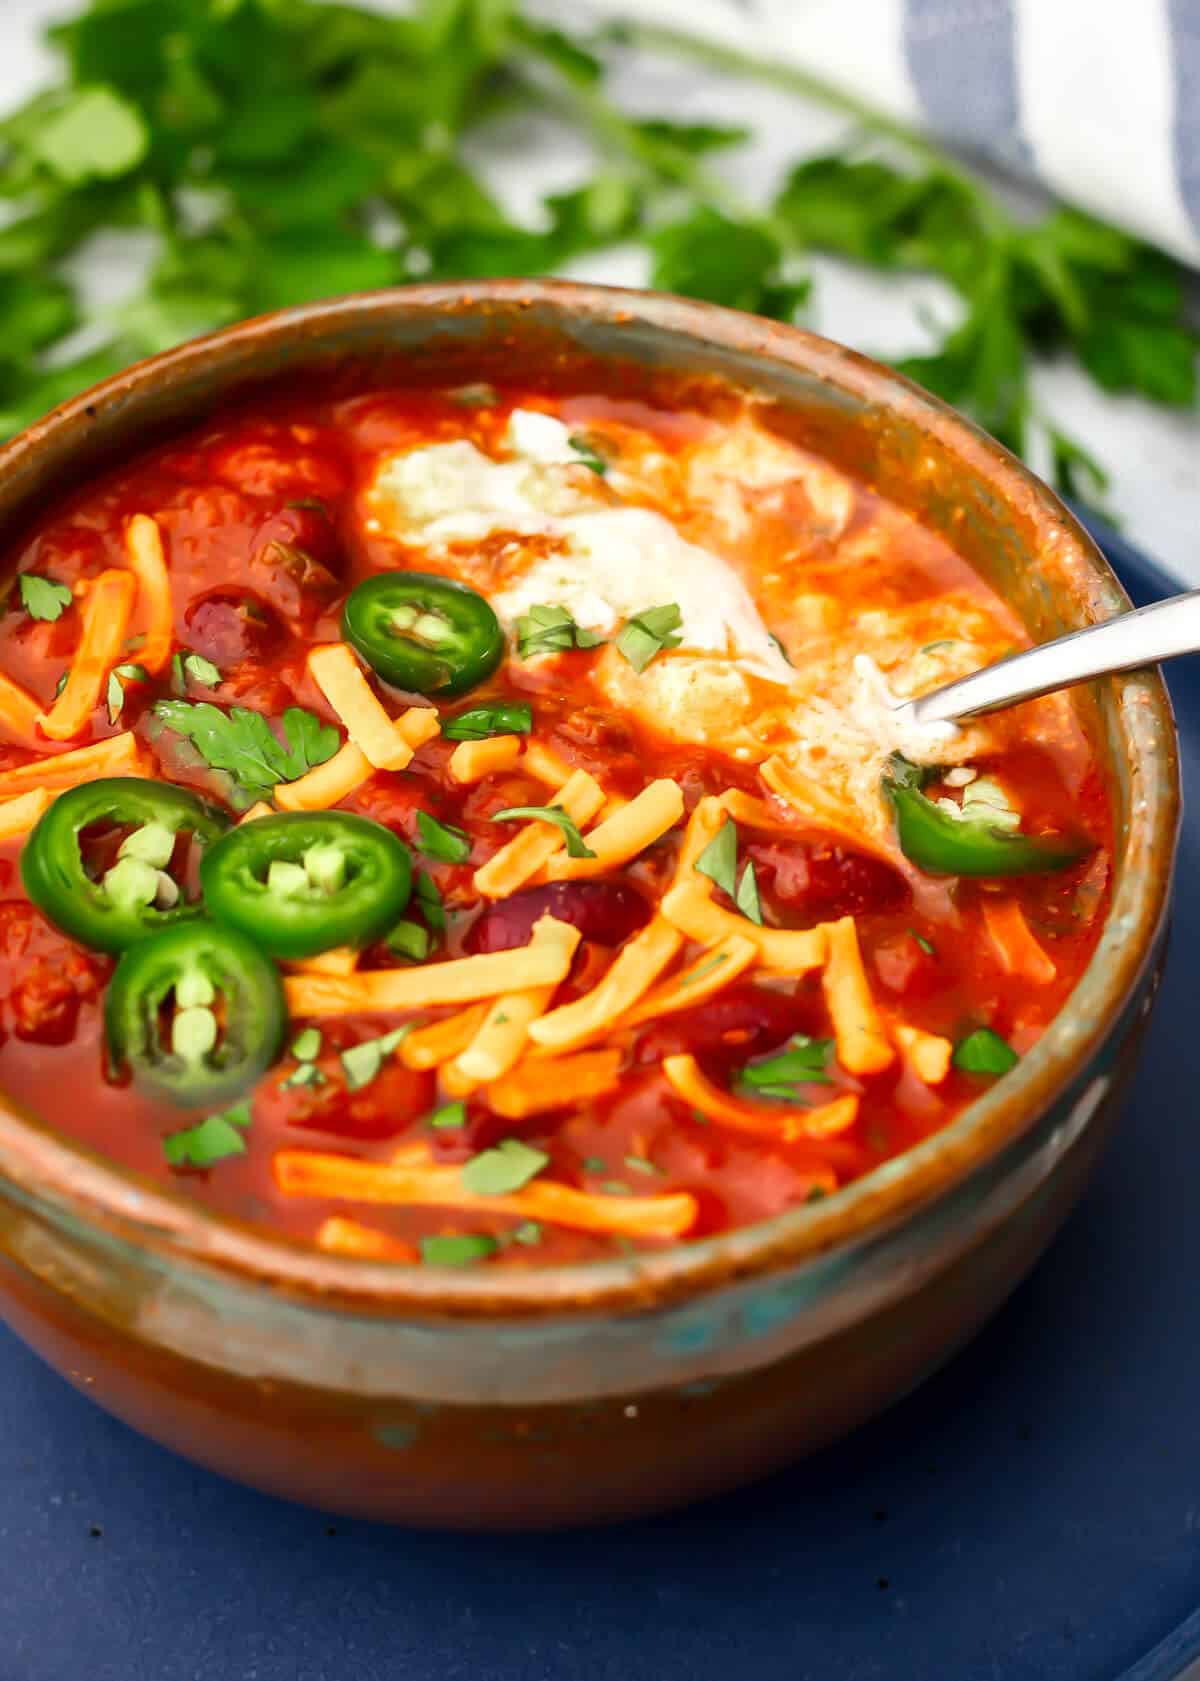 A bowl of Impossible chili with vegan cheese, vegan sour cream, and jalapenos on top.